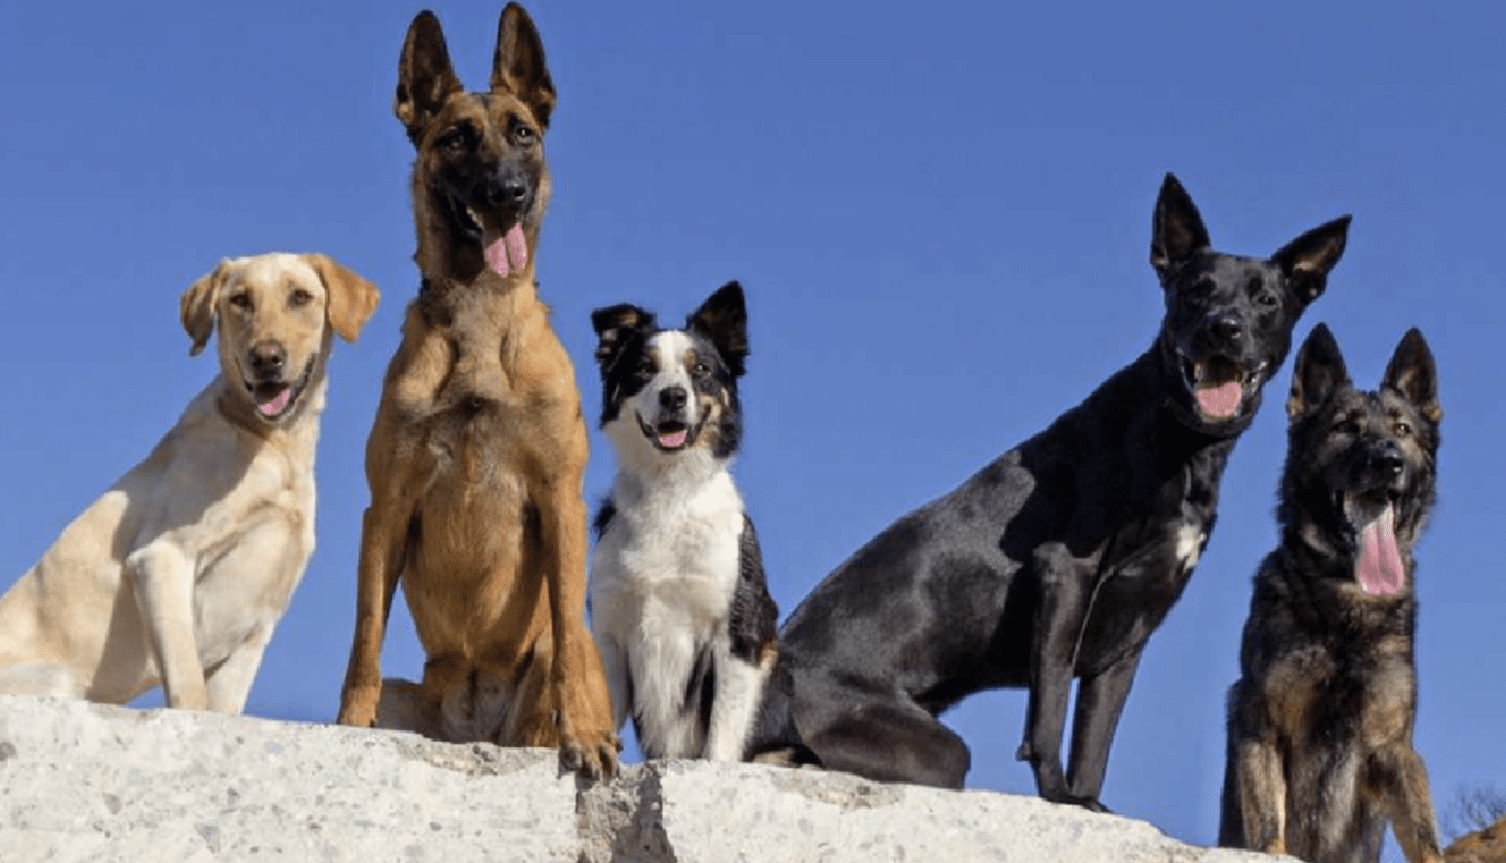 Hero Dogs conduct rescue missions